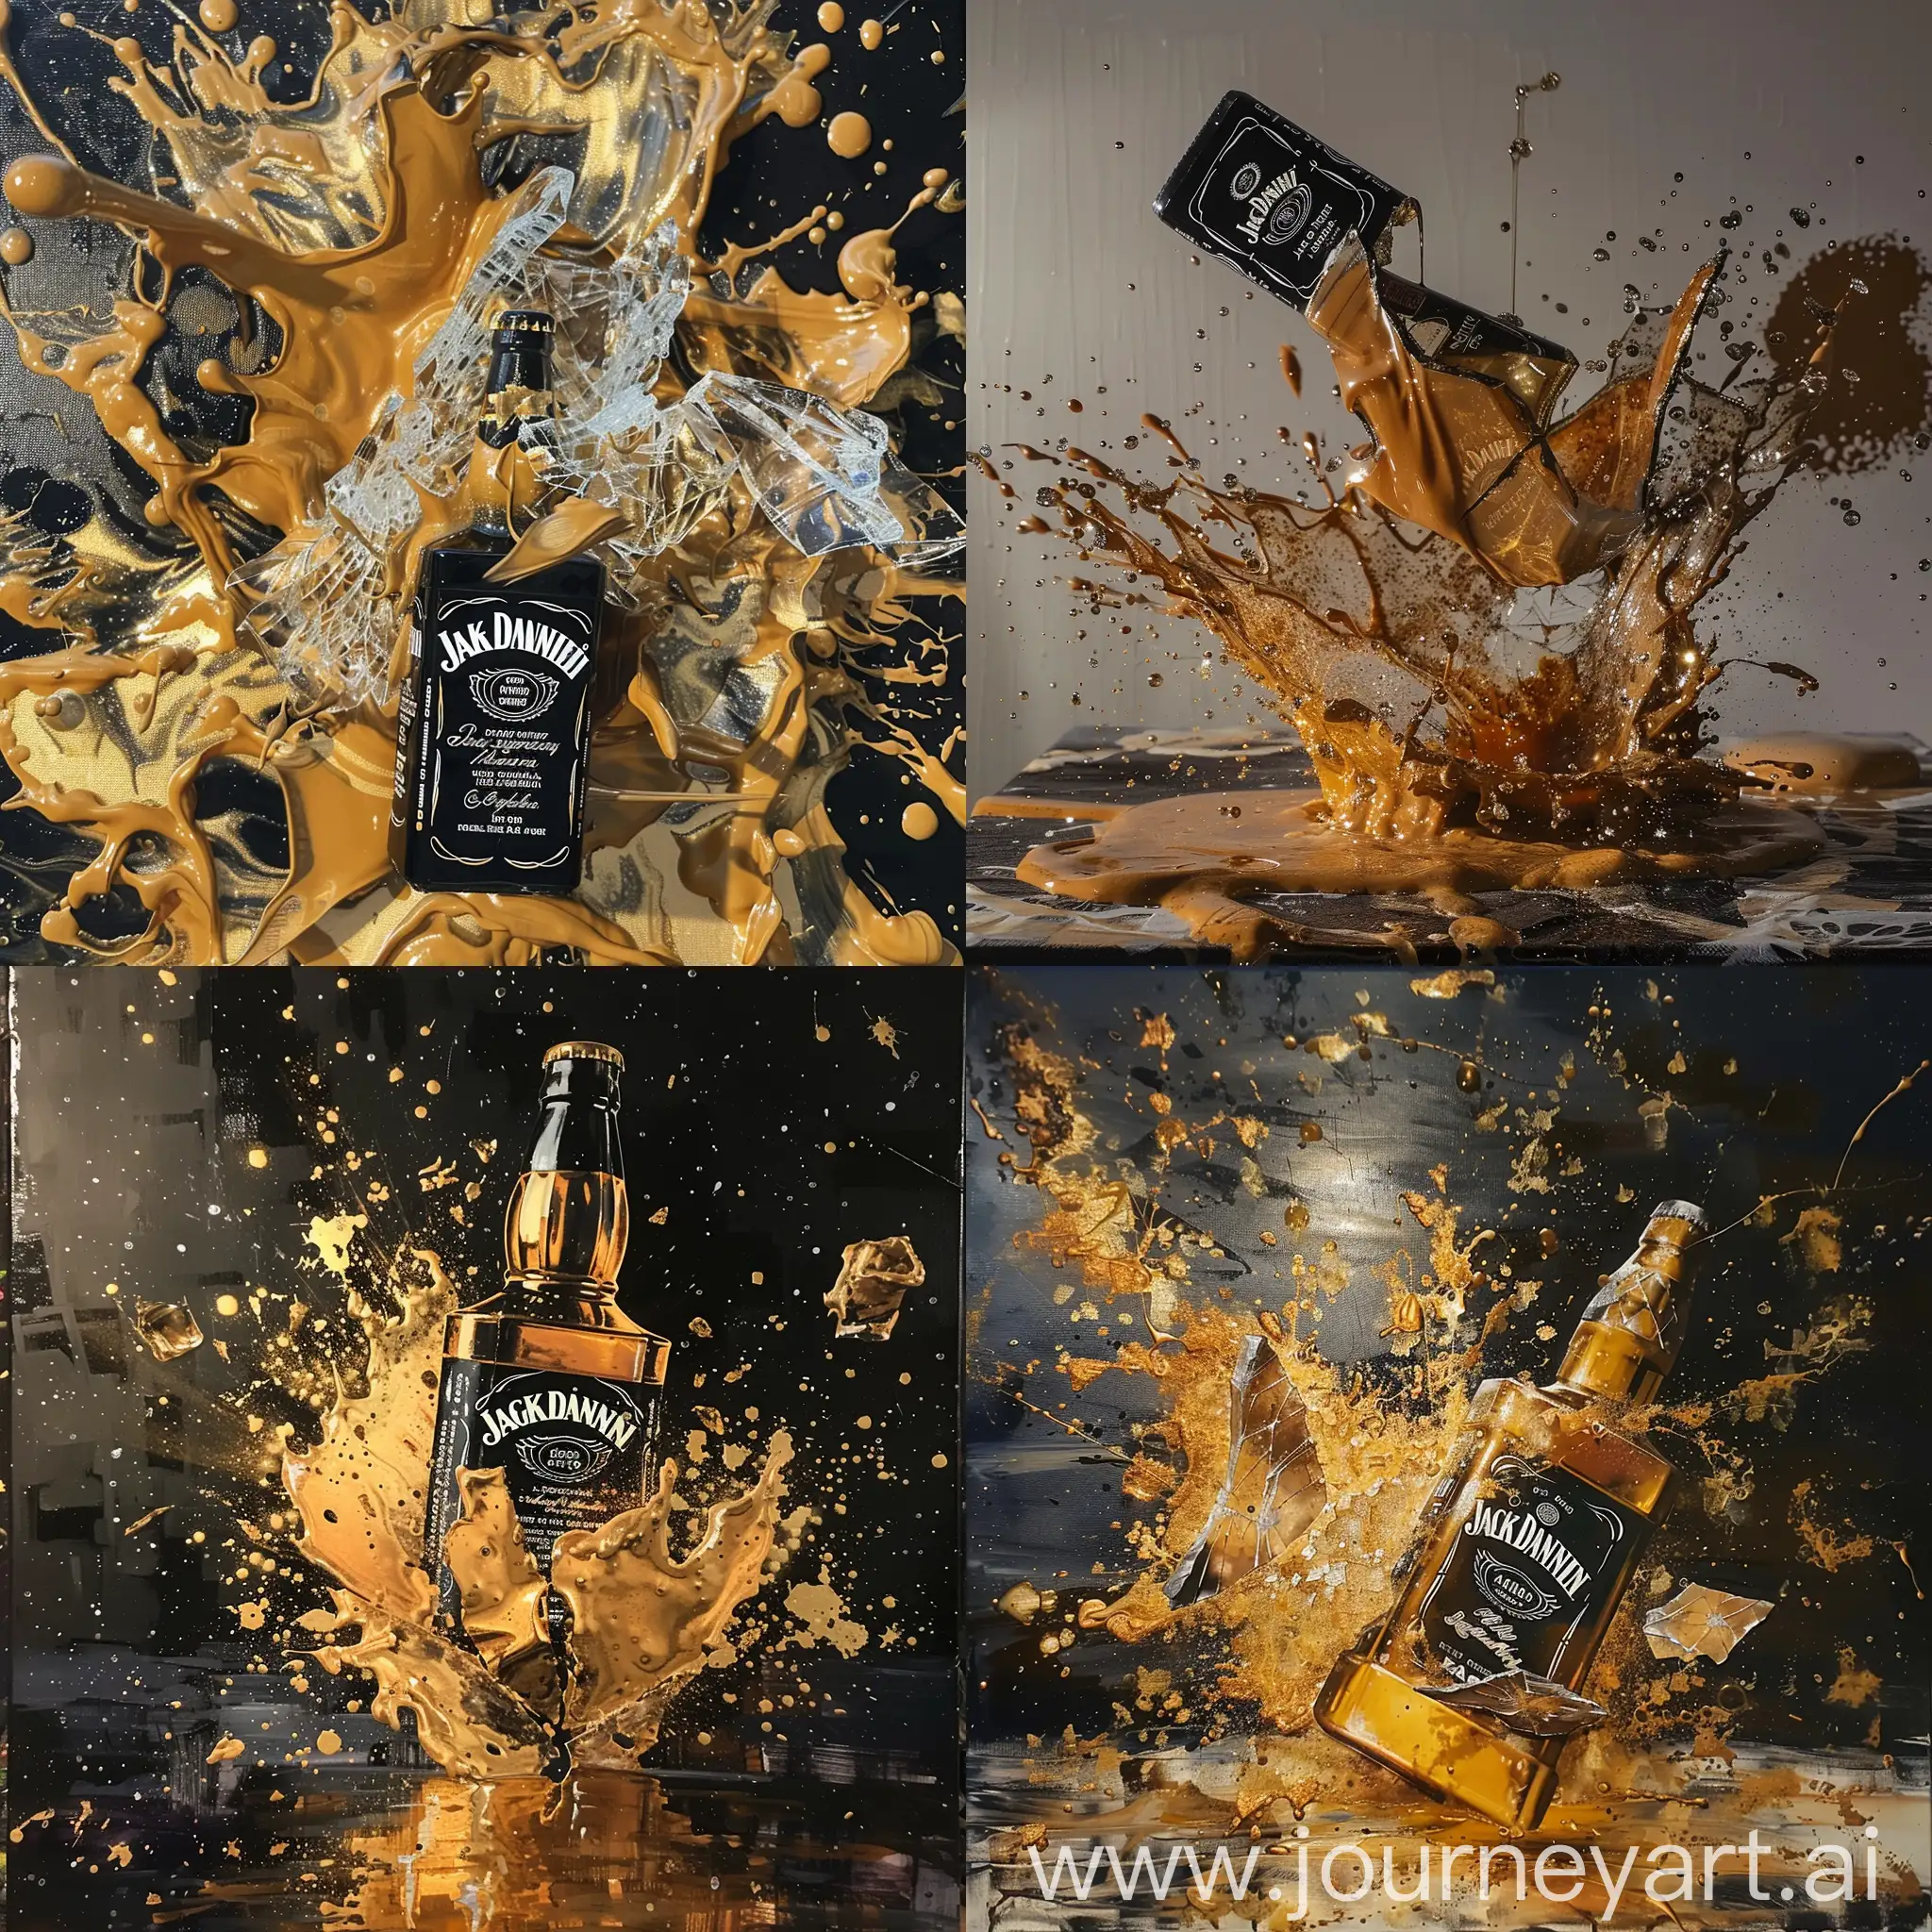 A broken jack daniels bottle, being thrown on a canvas, filled with golden epoxy